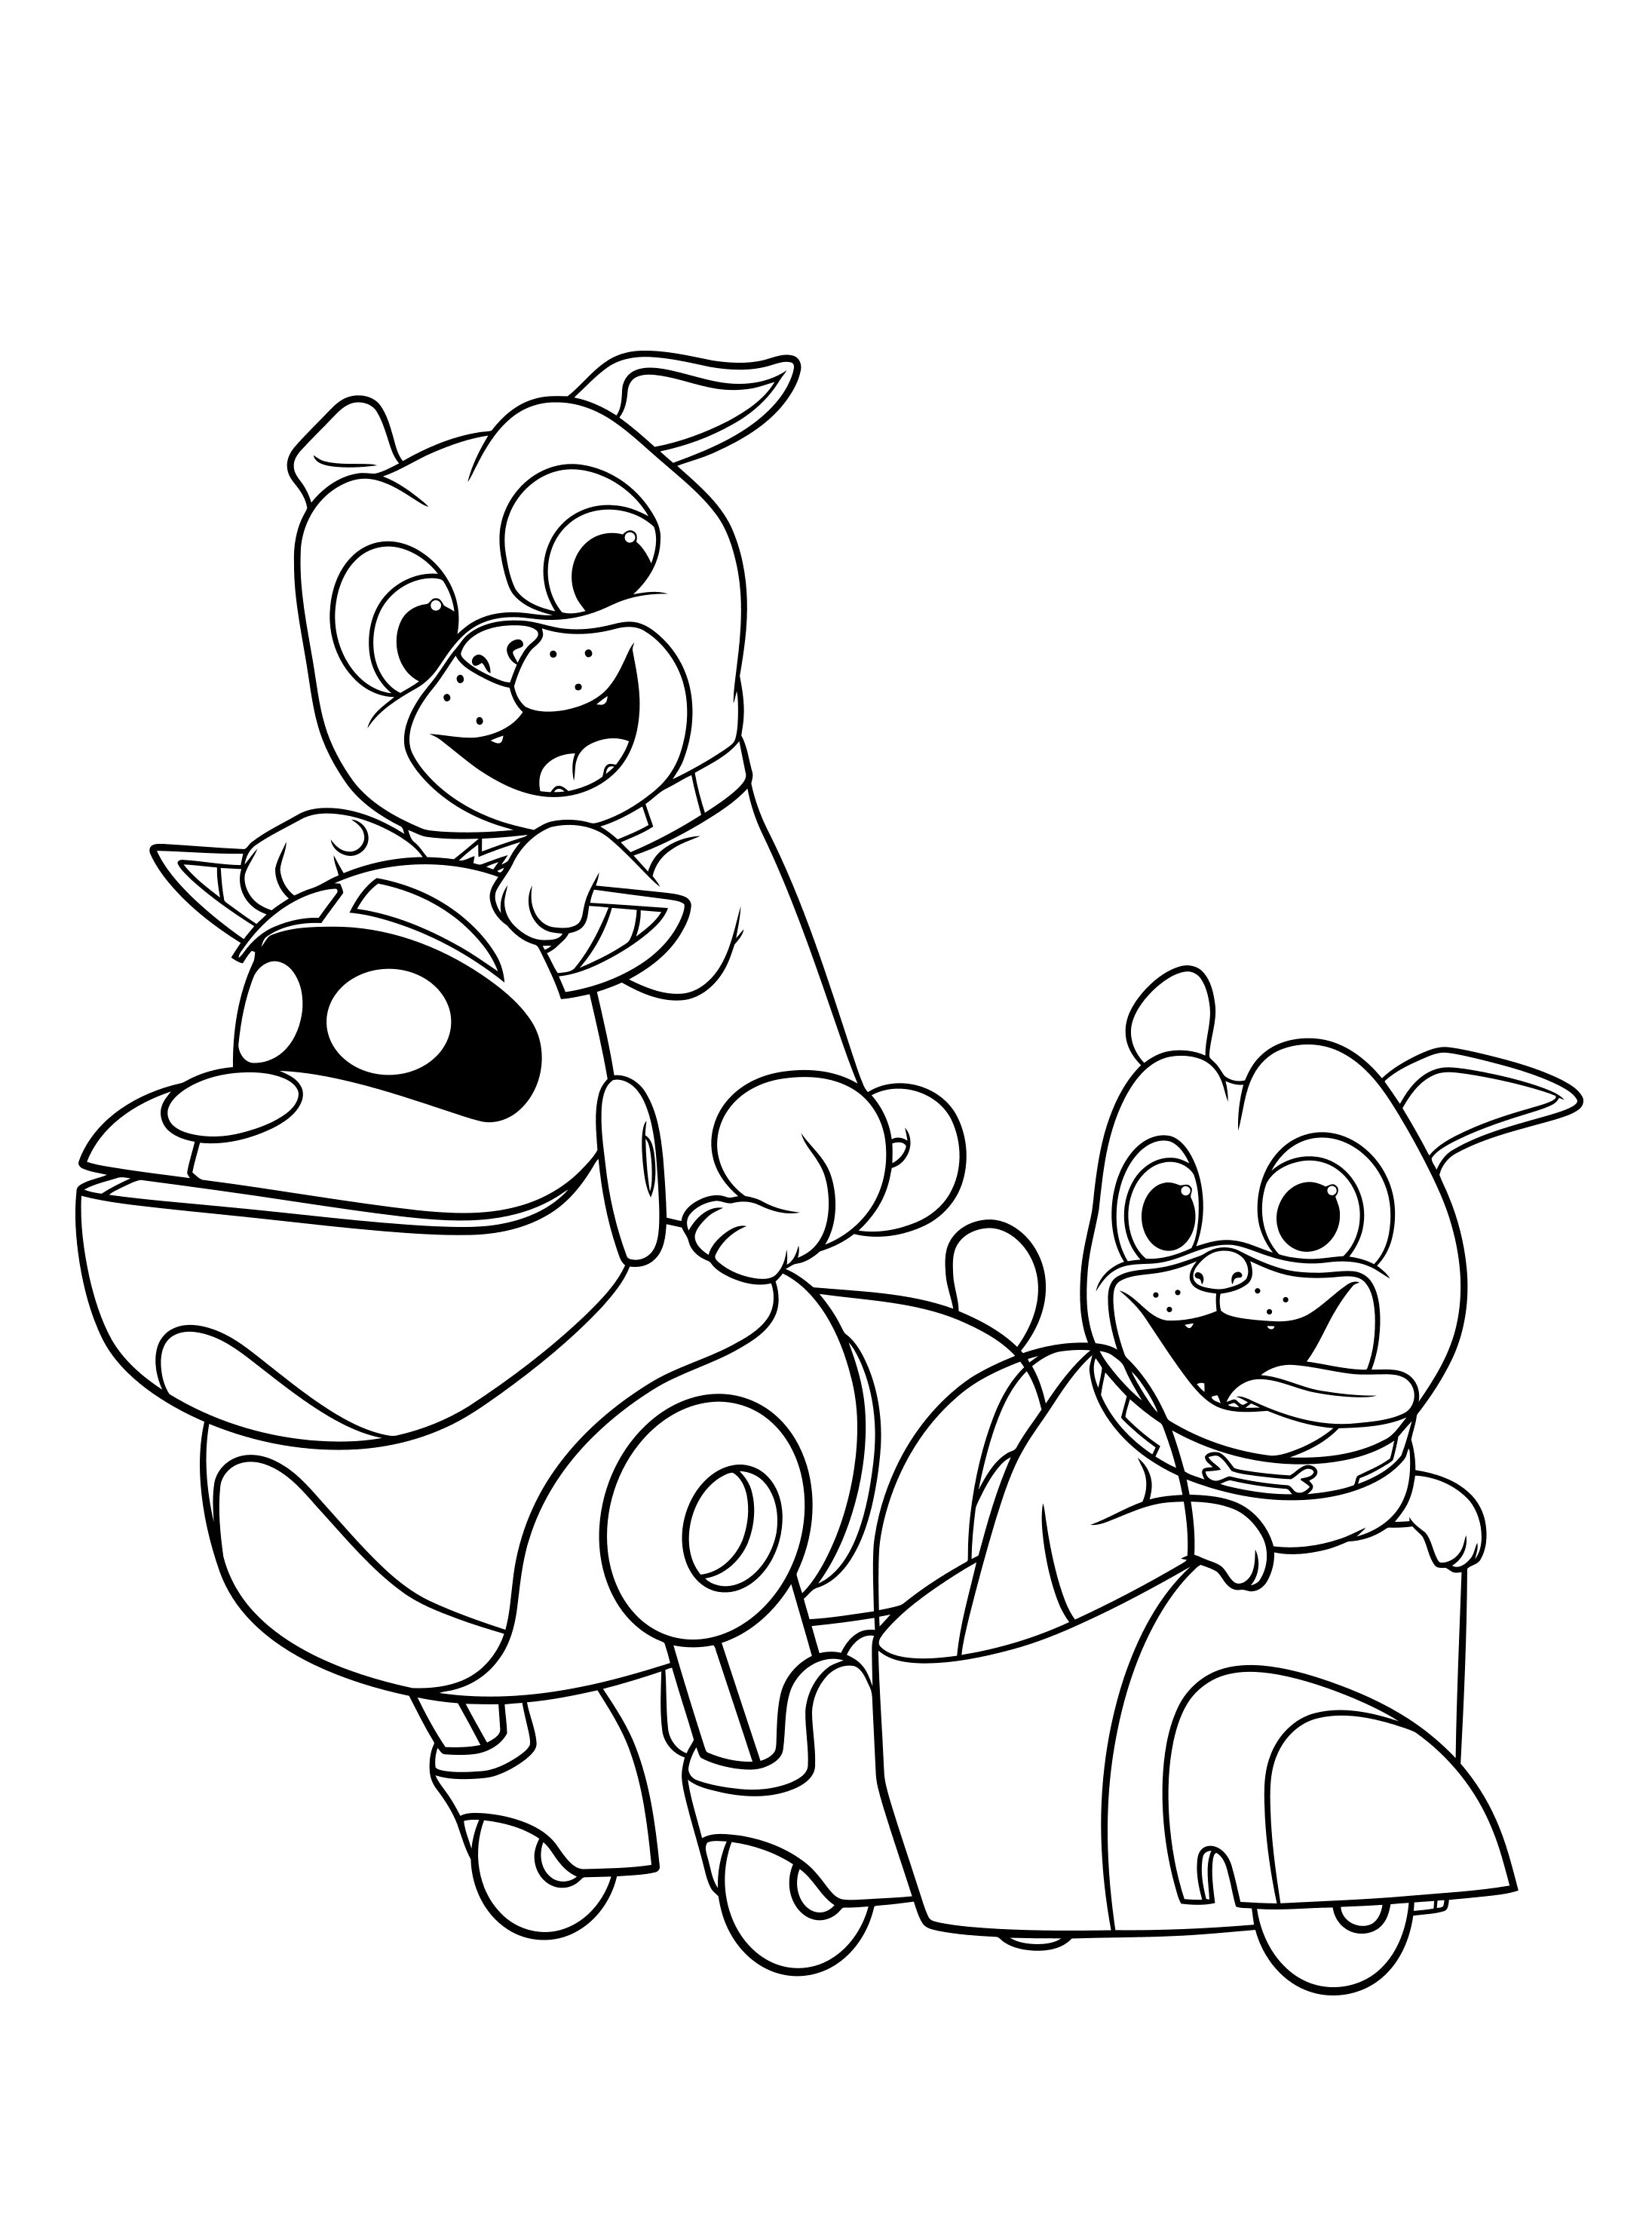 Secrets Puppy Dog Pals Coloring Pages To Download And Print For Free